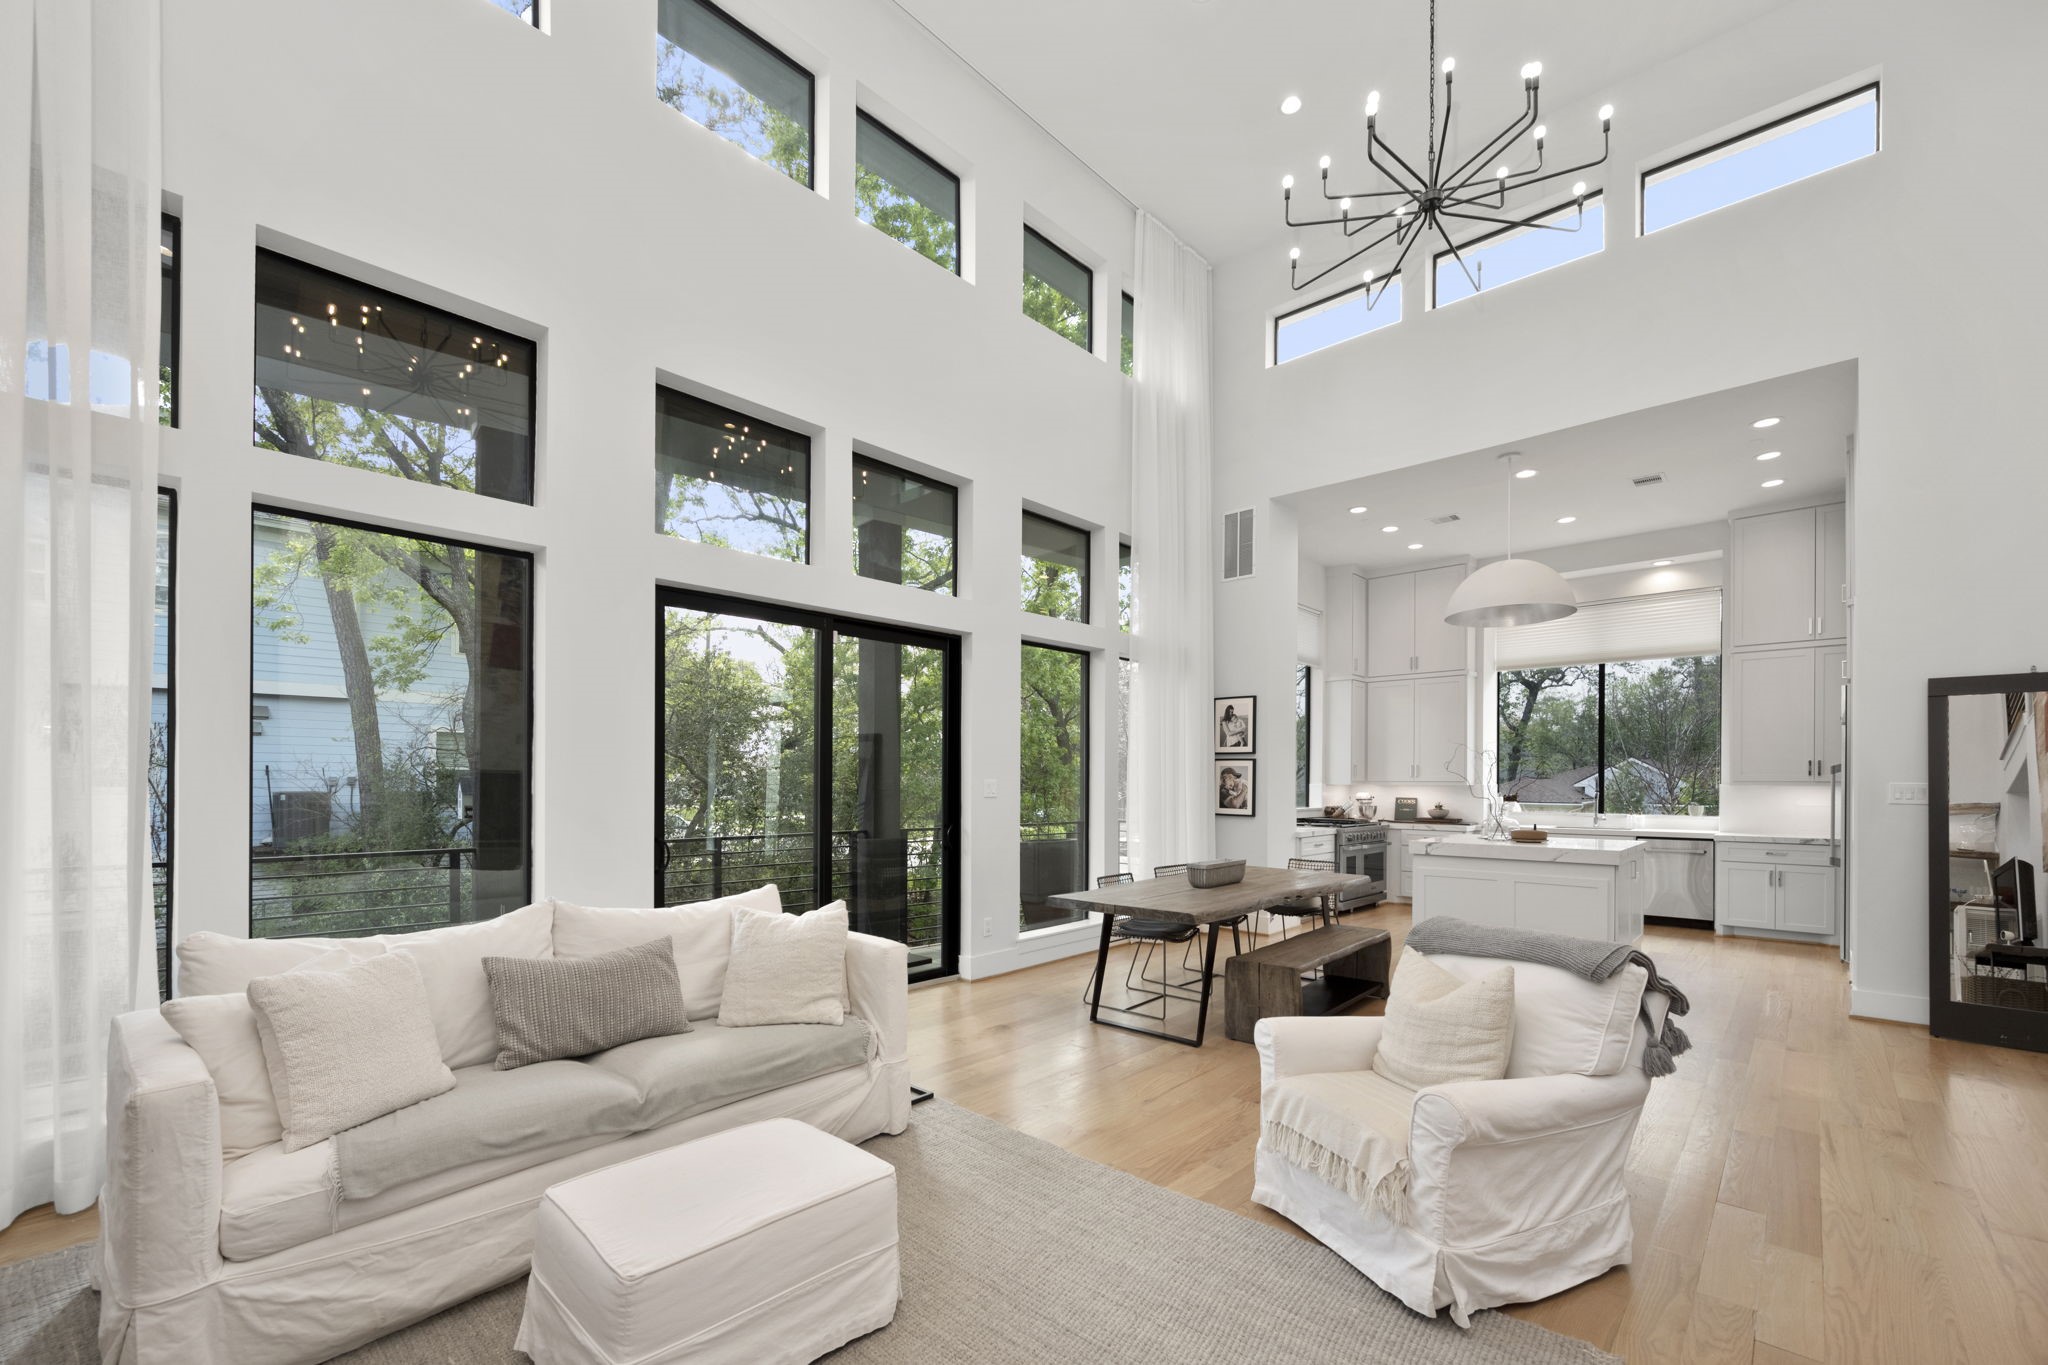 This open concept living is a dream set up for entertaining or everyday living. Light from the large windows, highlighted by custom window panels, bring in warmth and showcase the natural surroundings outdoors.